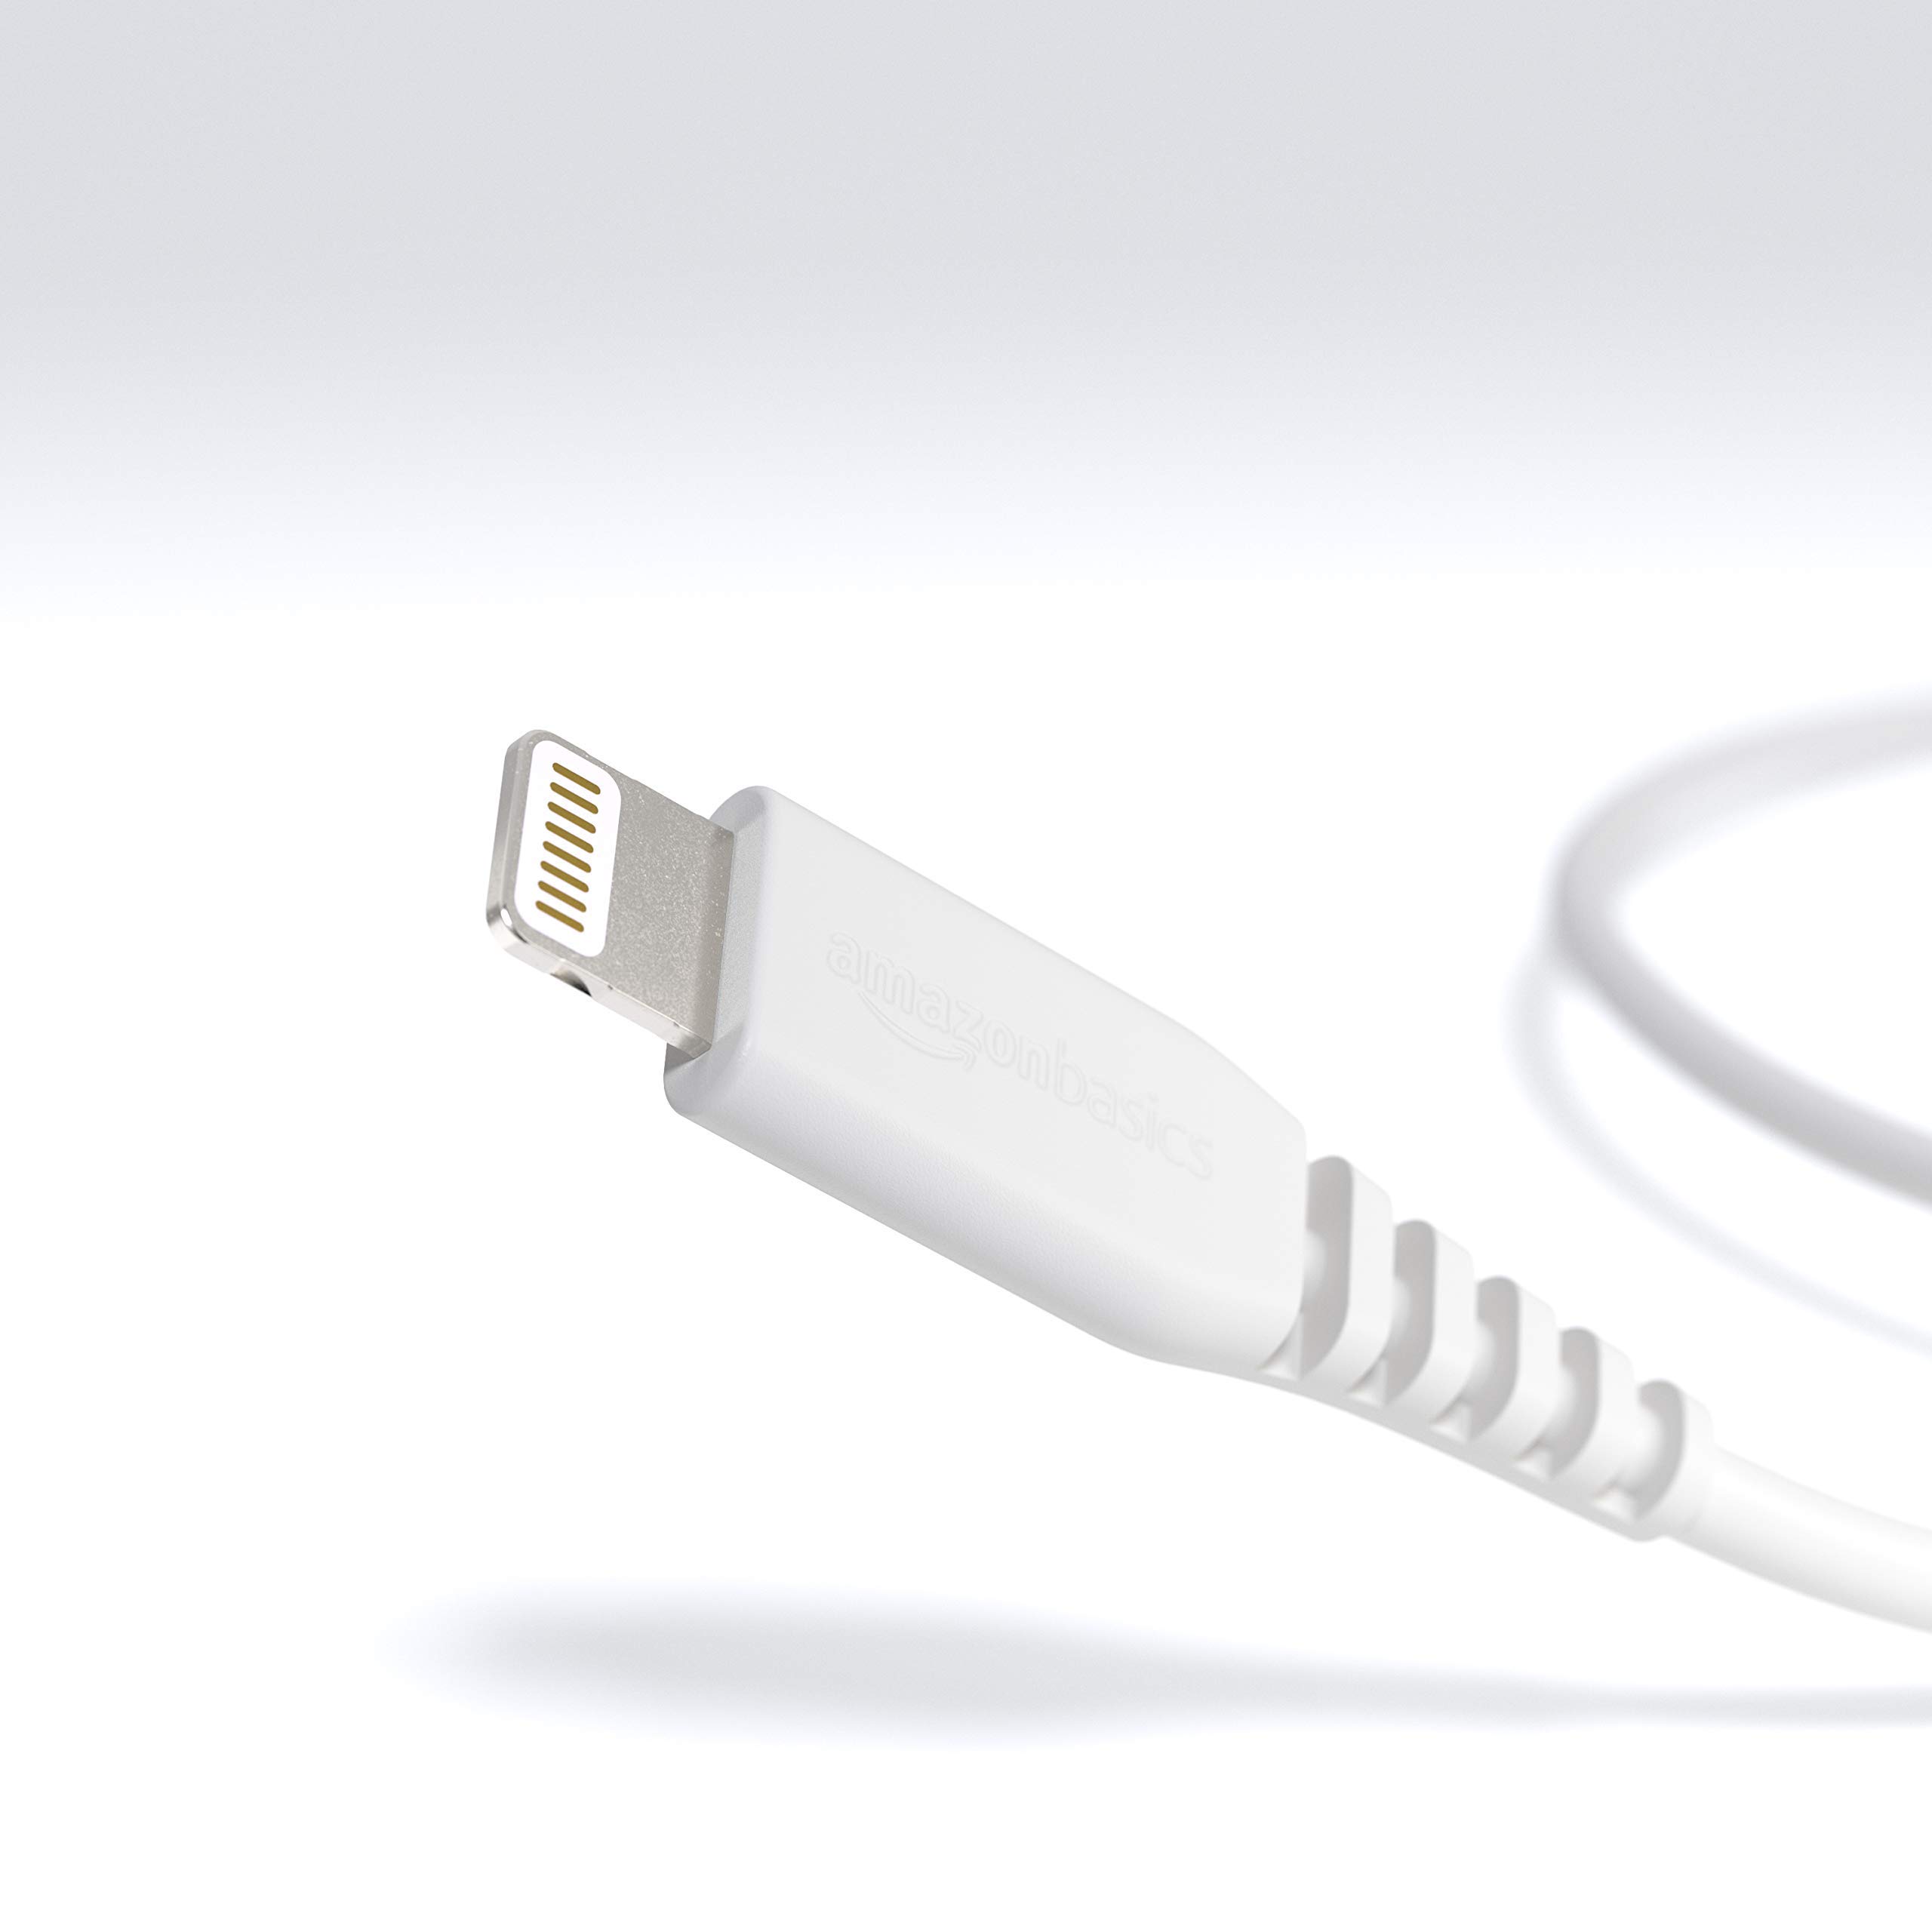 Amazon Basics Lighting to USB A Cable for iPhone and iPad - 6 Feet (1.8 Meters) - 2 -Pack - White